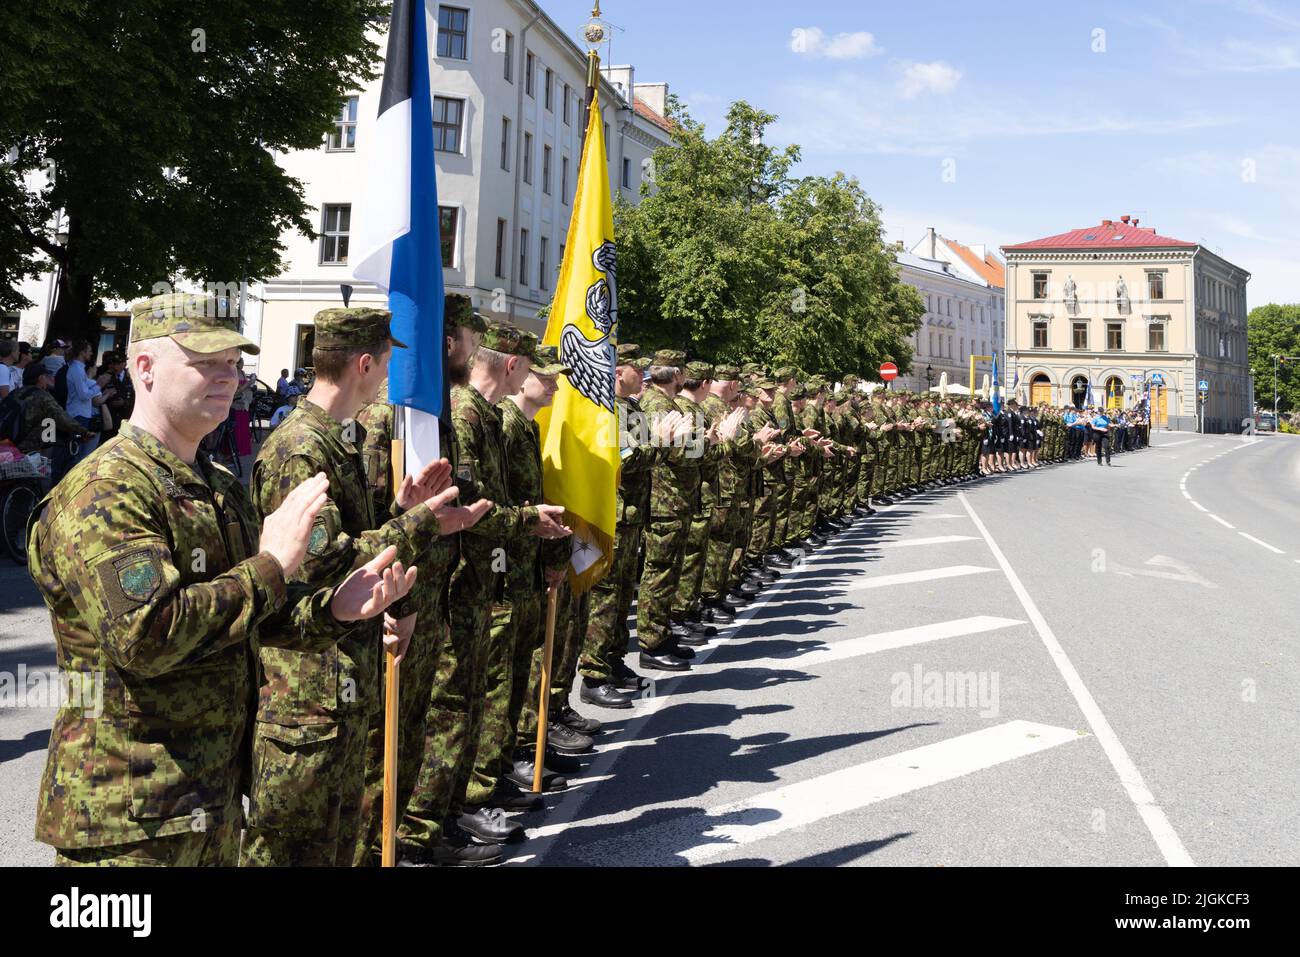 Estonian Defence League; an army of paramilitary soldiers parade on Victory Day, 23rd June, in Tartu, Estonia, Europe Stock Photo